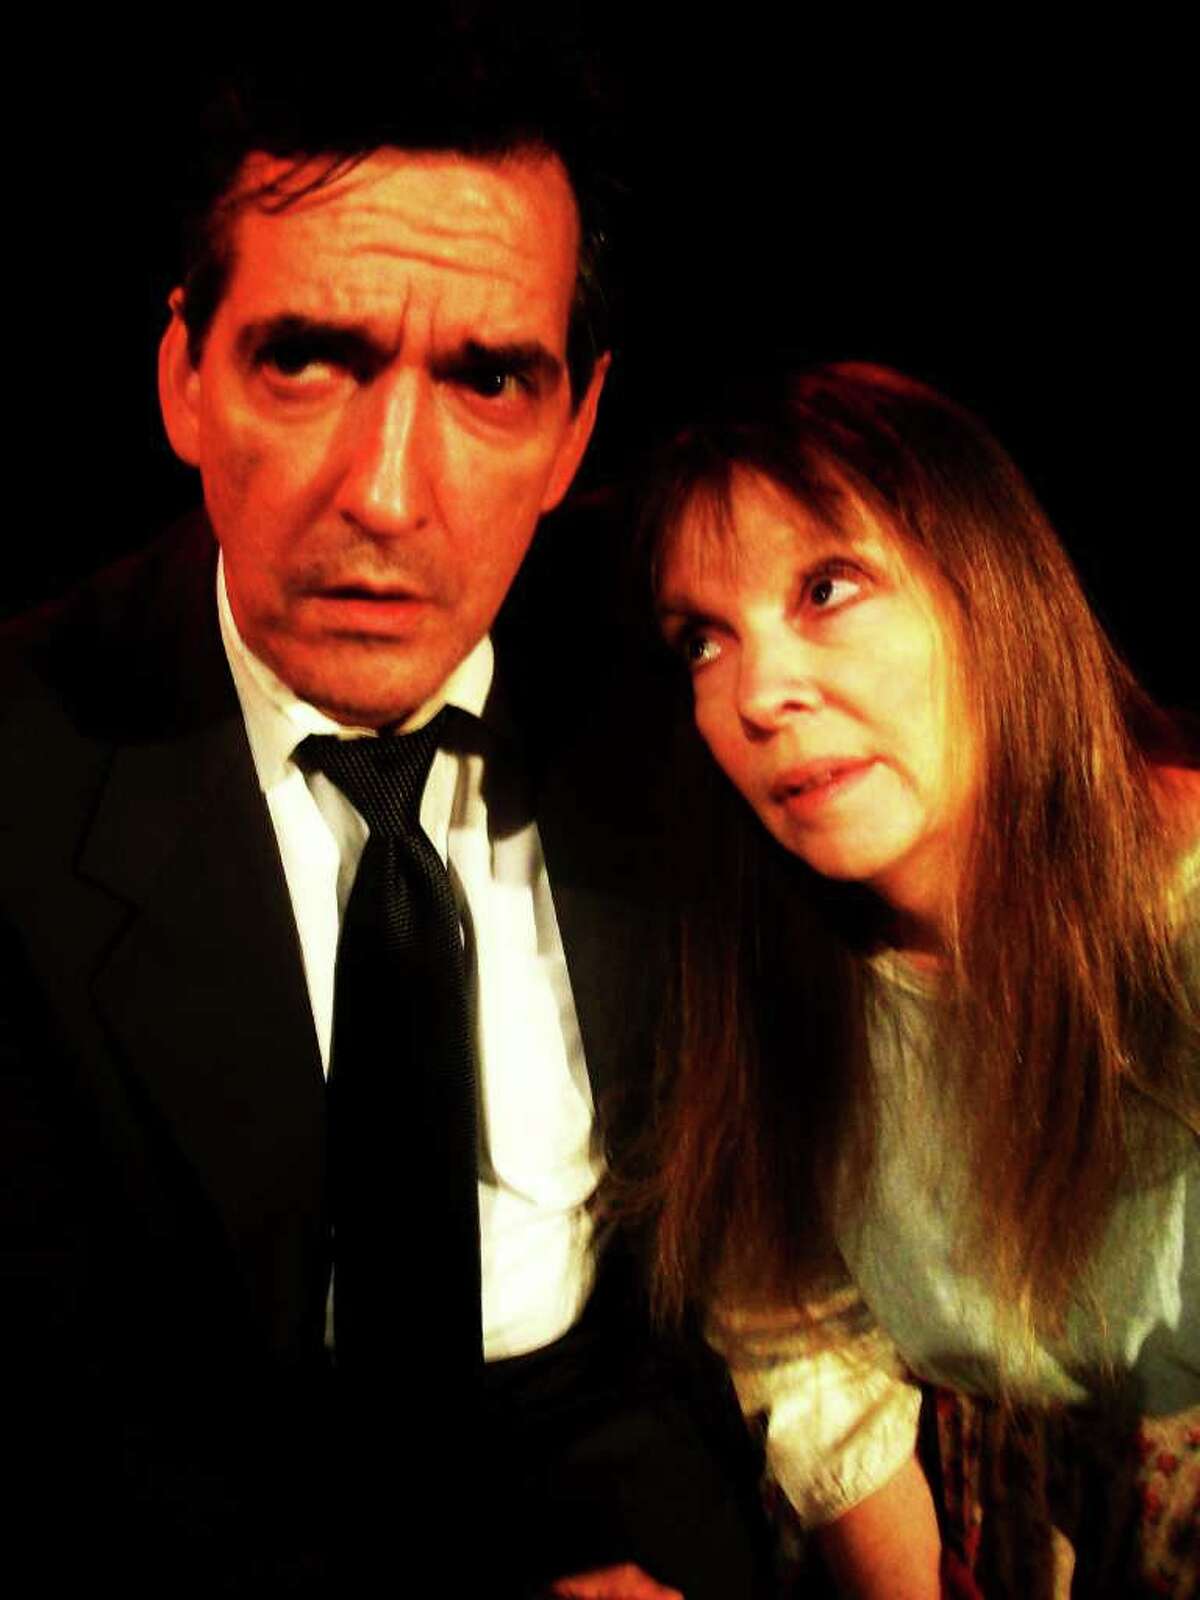 Barry Goettl and Deborah Basham-Burns play Willy and Linda Loman in the Rose Theatre Company's 'Death of a Salesman.' Courtesy Rose Theatre Company